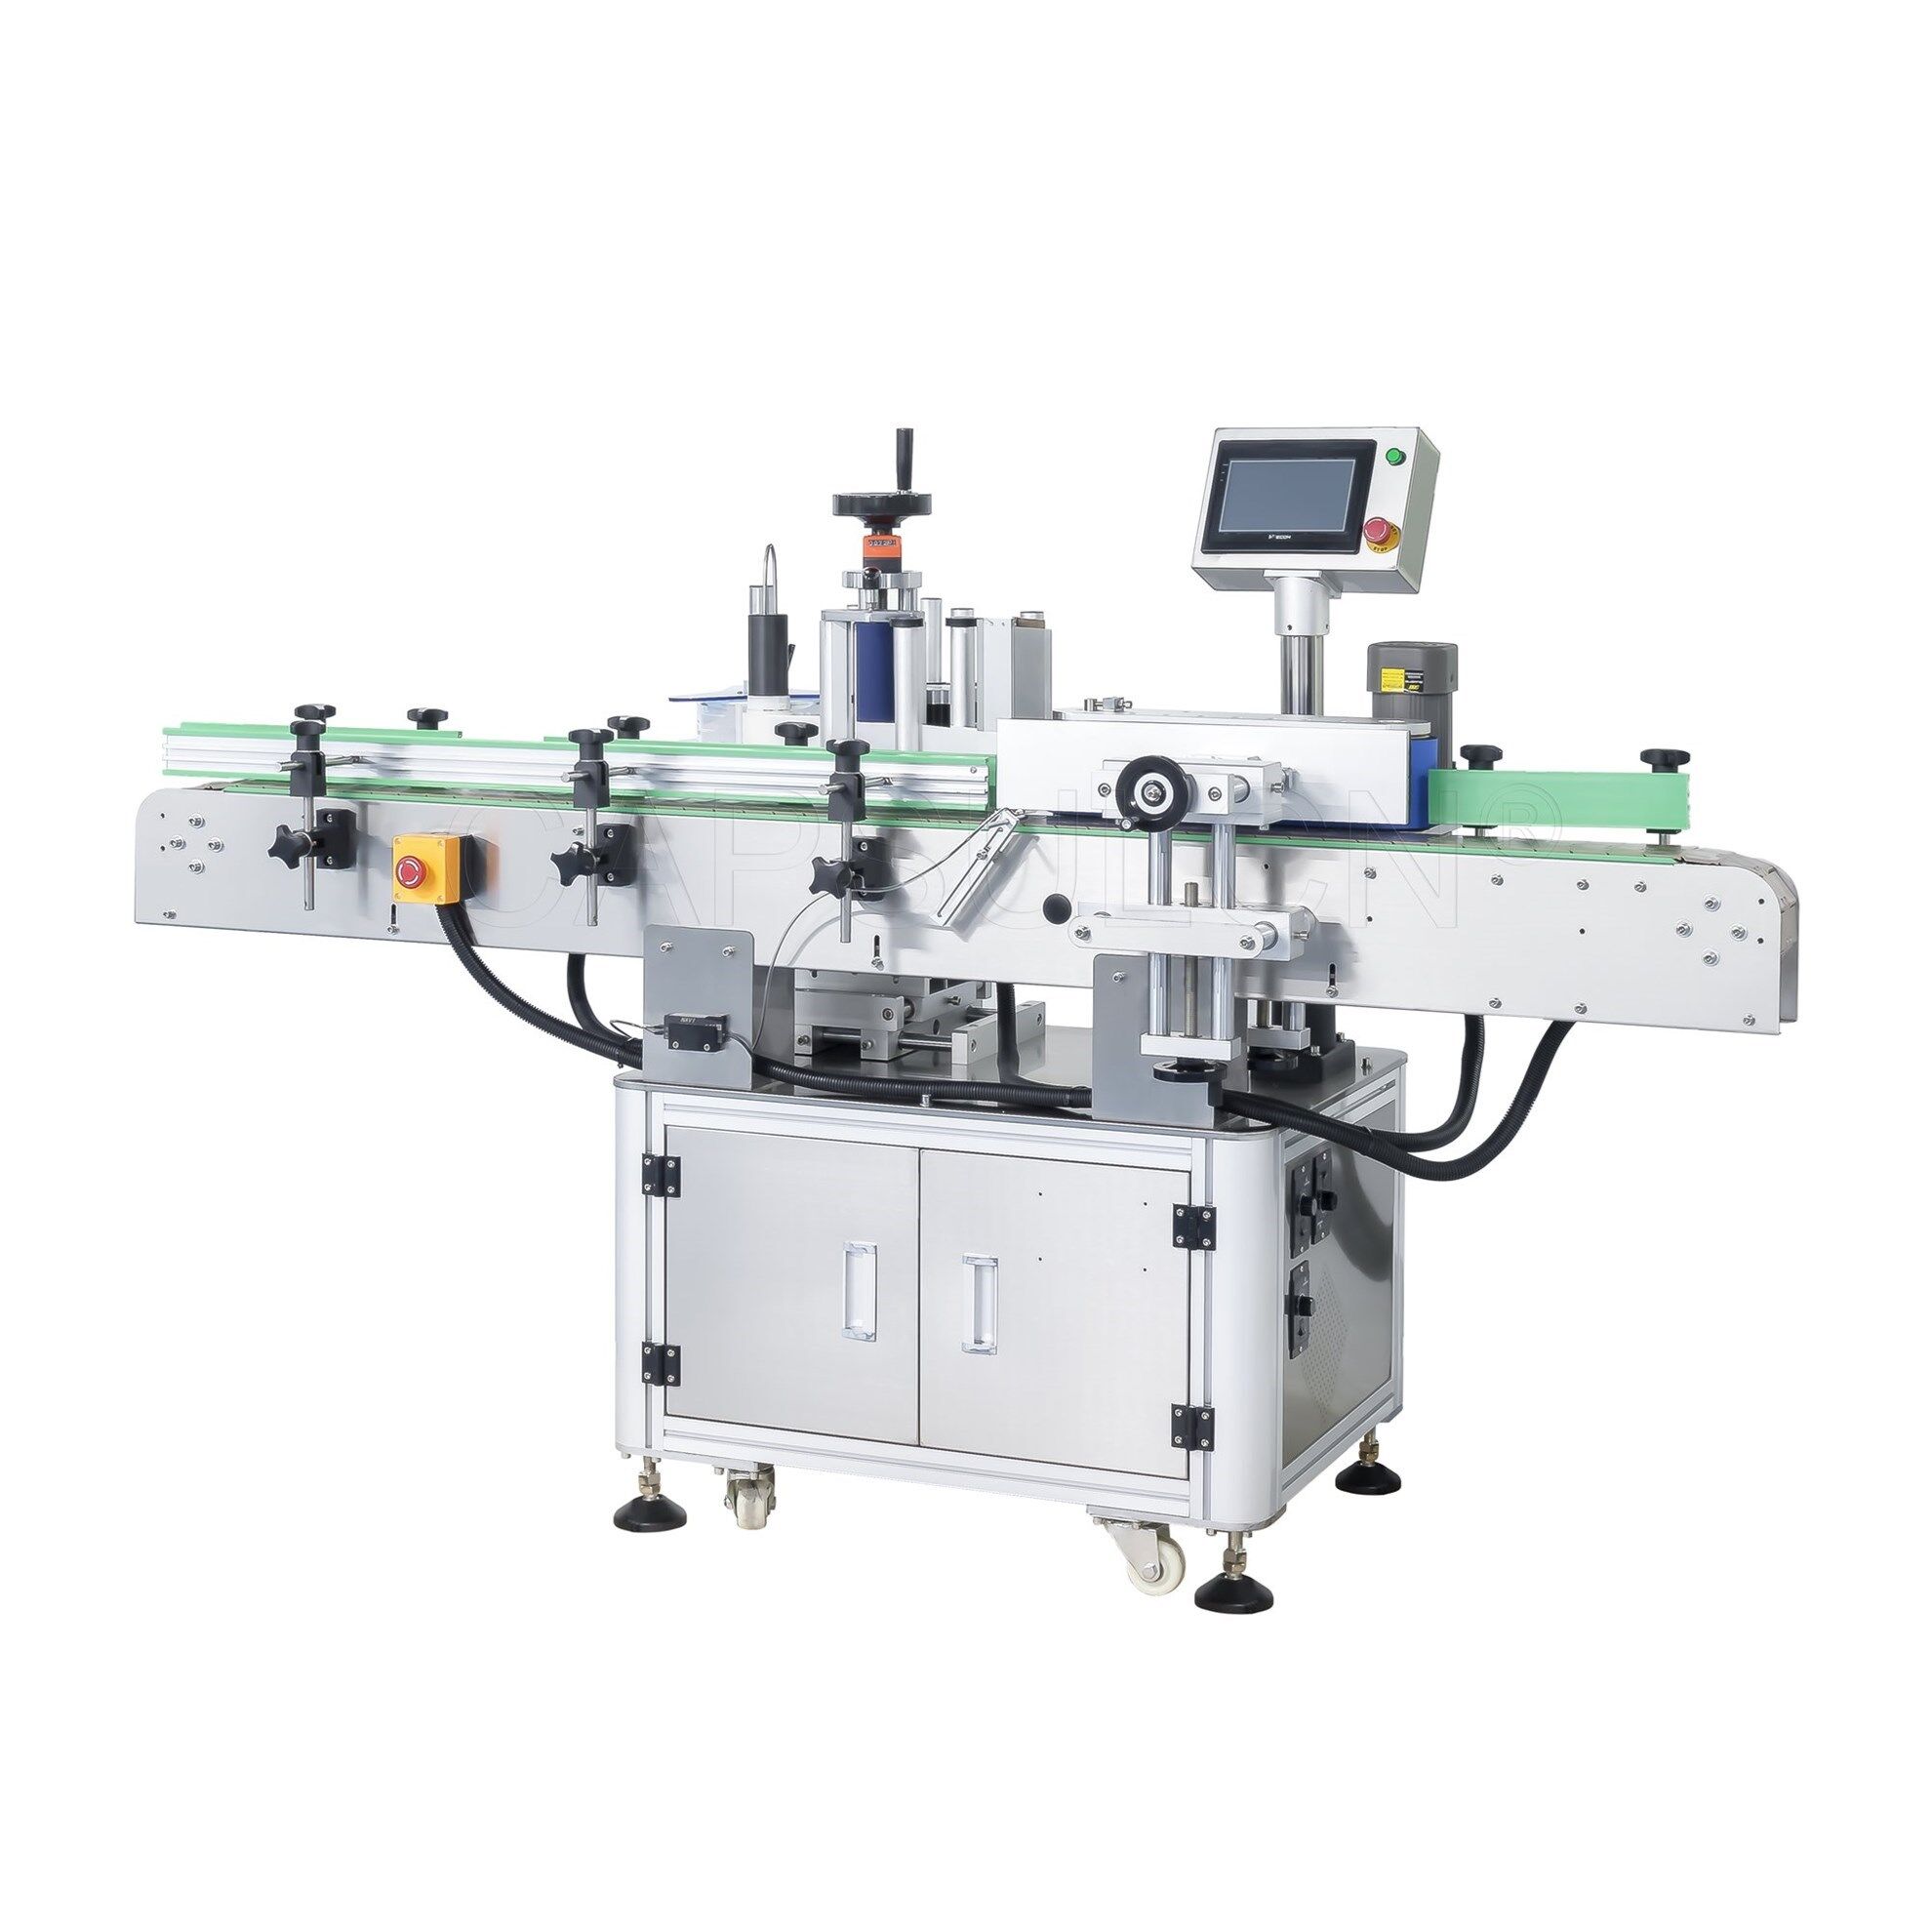 https://cdn.capsulcn.com/content/images/thumbs/0005758_automatic-poked-roll-type-vertical-labeling-machine-nct-21100.jpeg?image_process=resize,l_960